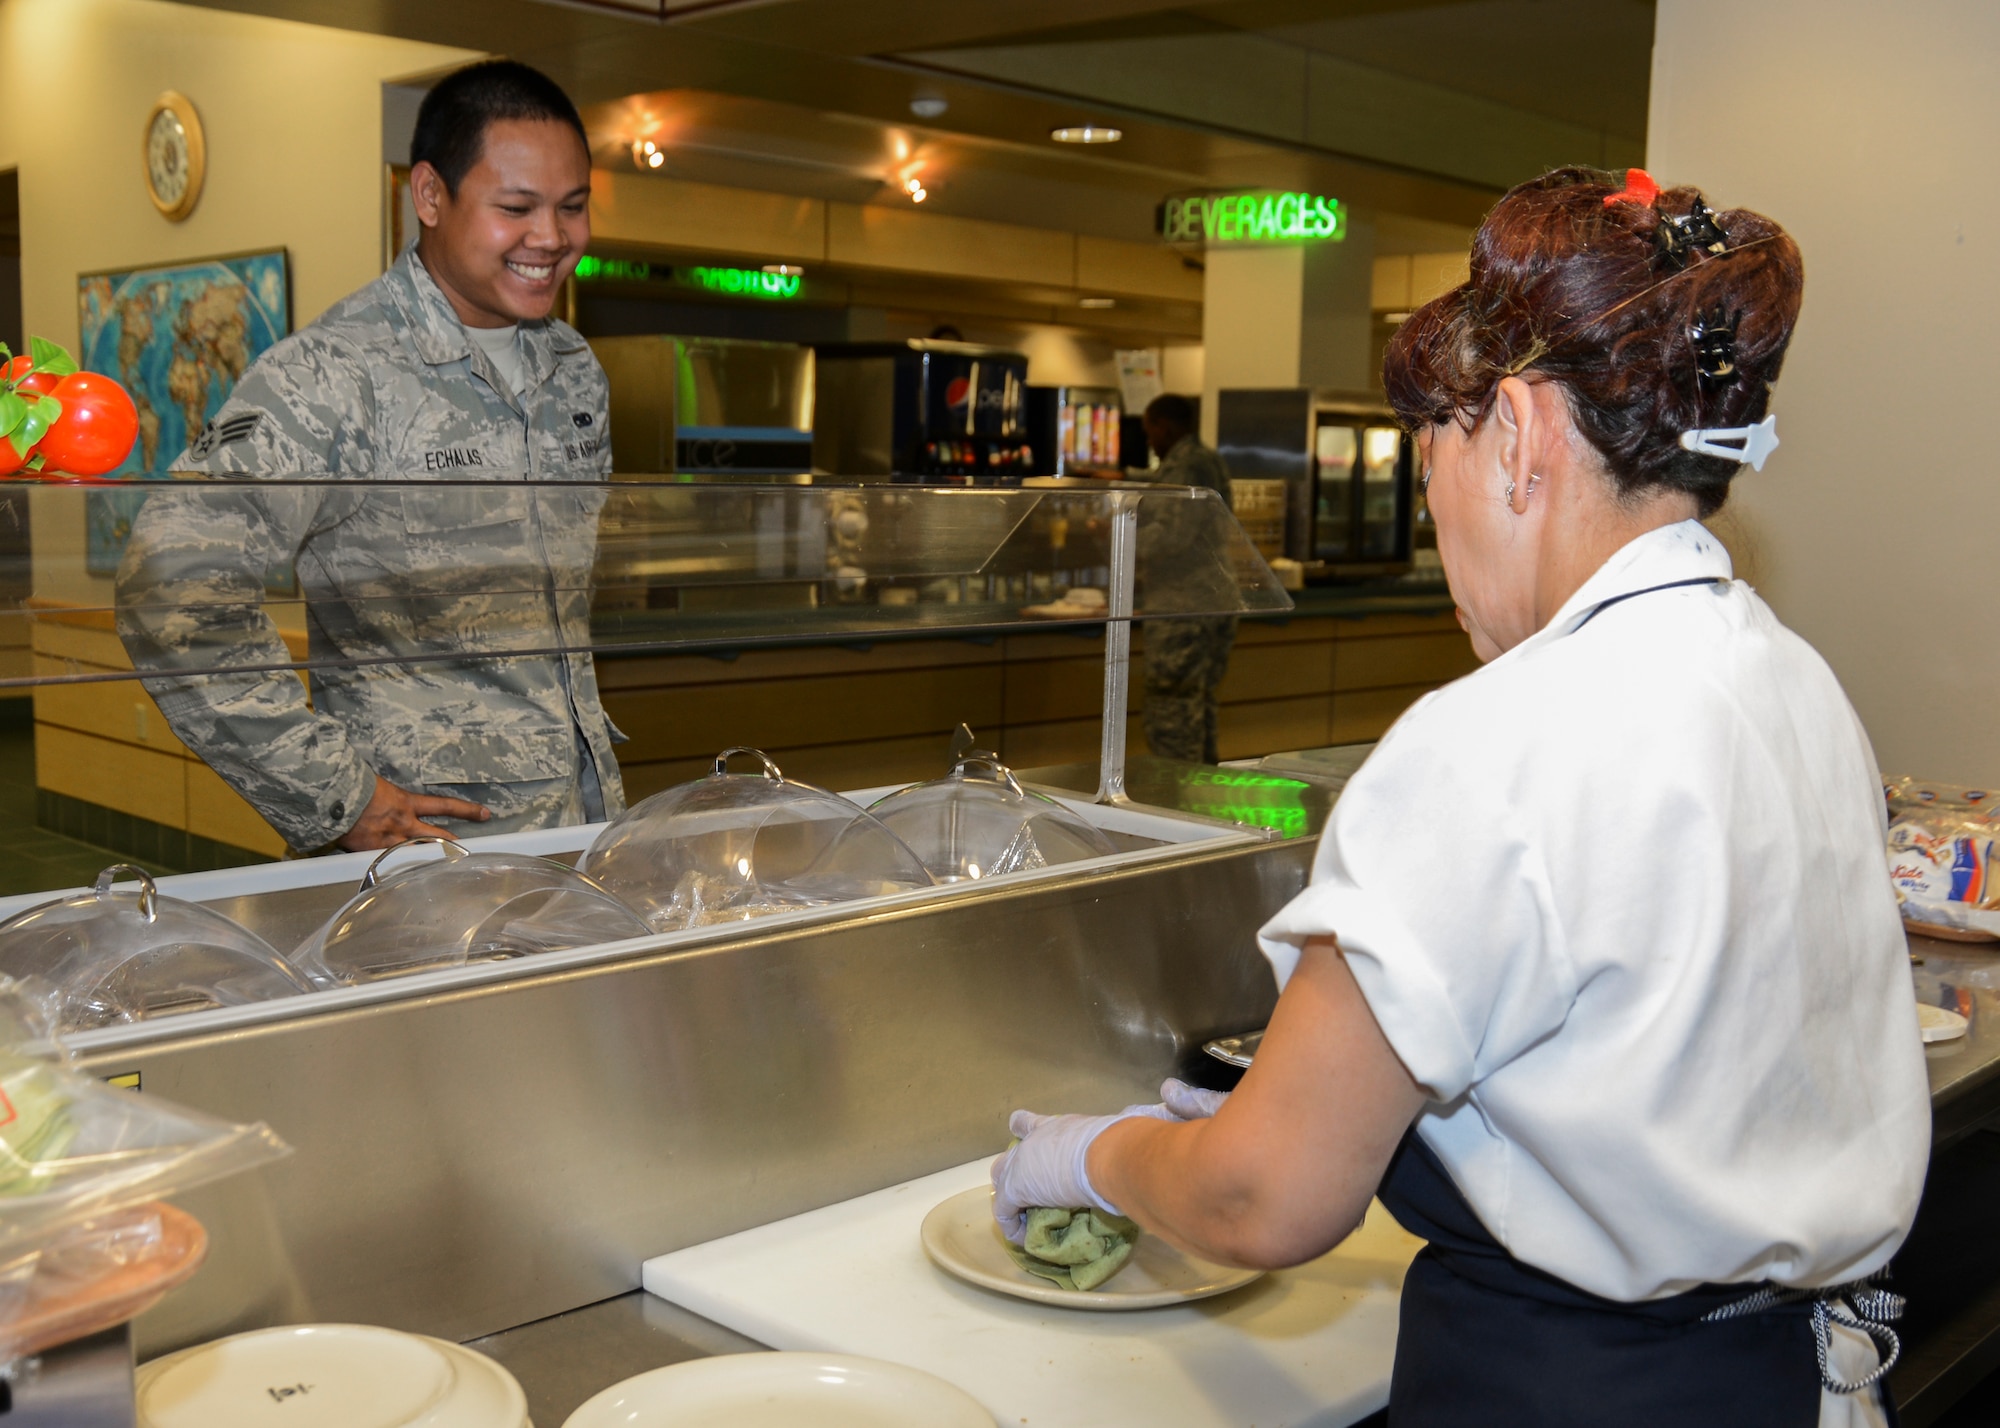 The Joshua Tree Dining Facility serves those on base who do not receive a basic allowance for subsistence, primarily those unaccompanied Airmen living in the dorms on base. (U.S. Air Force photo by Rebecca Amber)